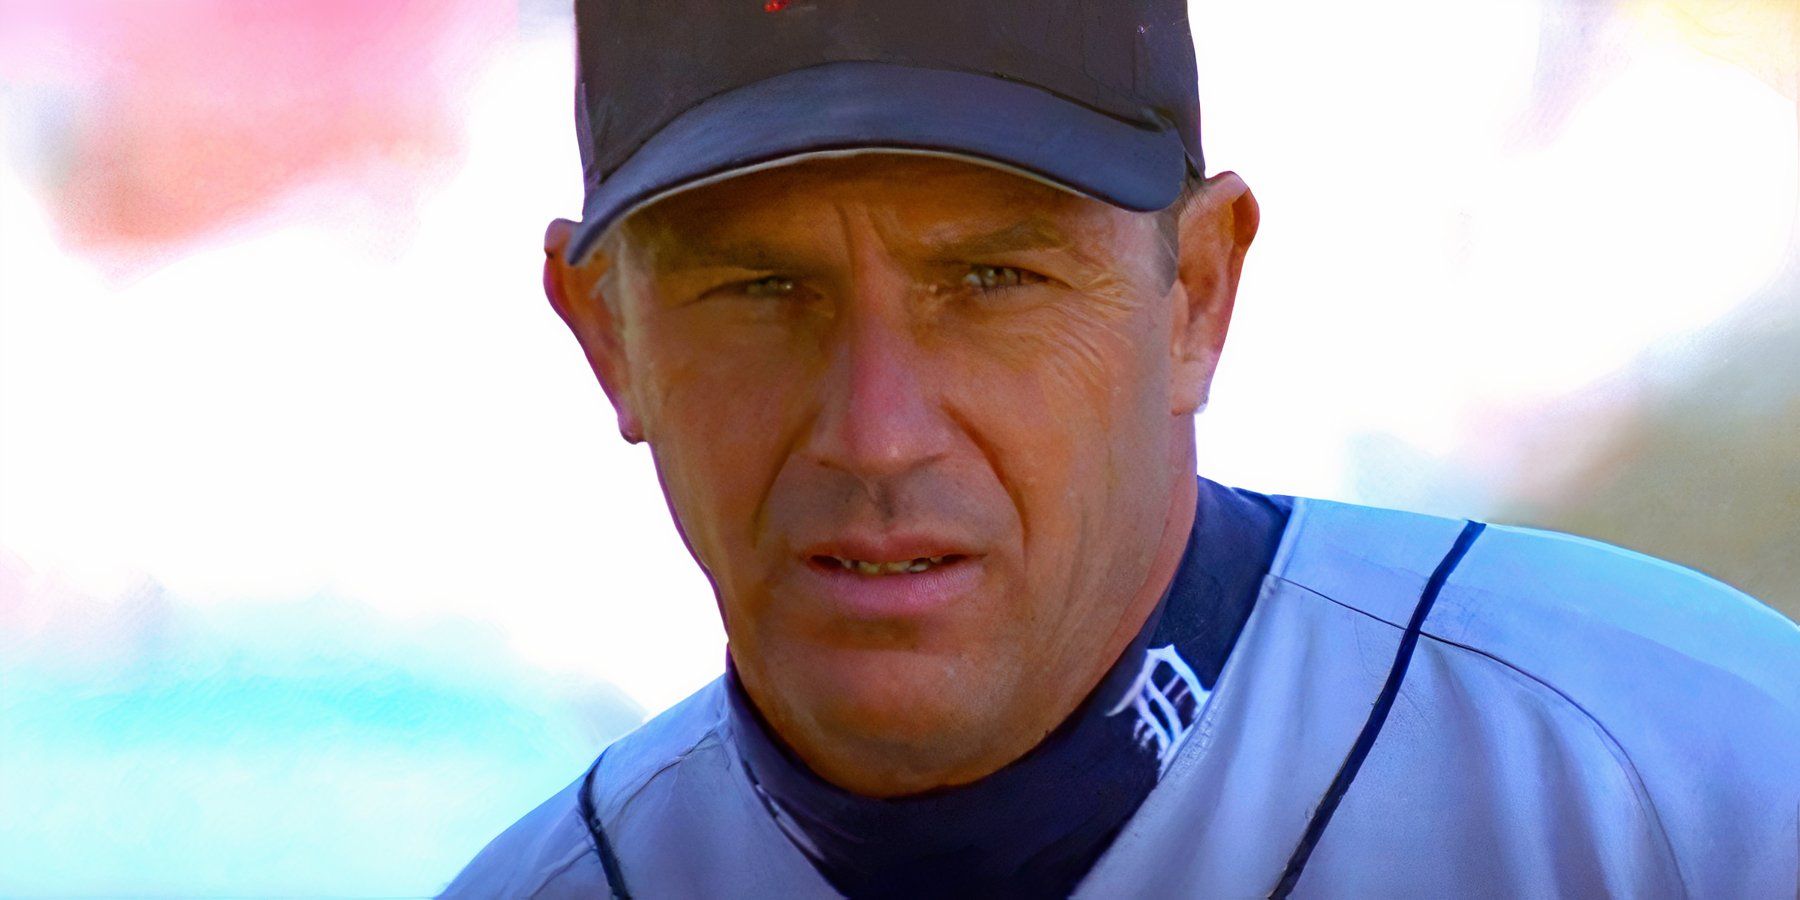 Kevin Costner as Billy Chapel looking ahead in For Love of the Game